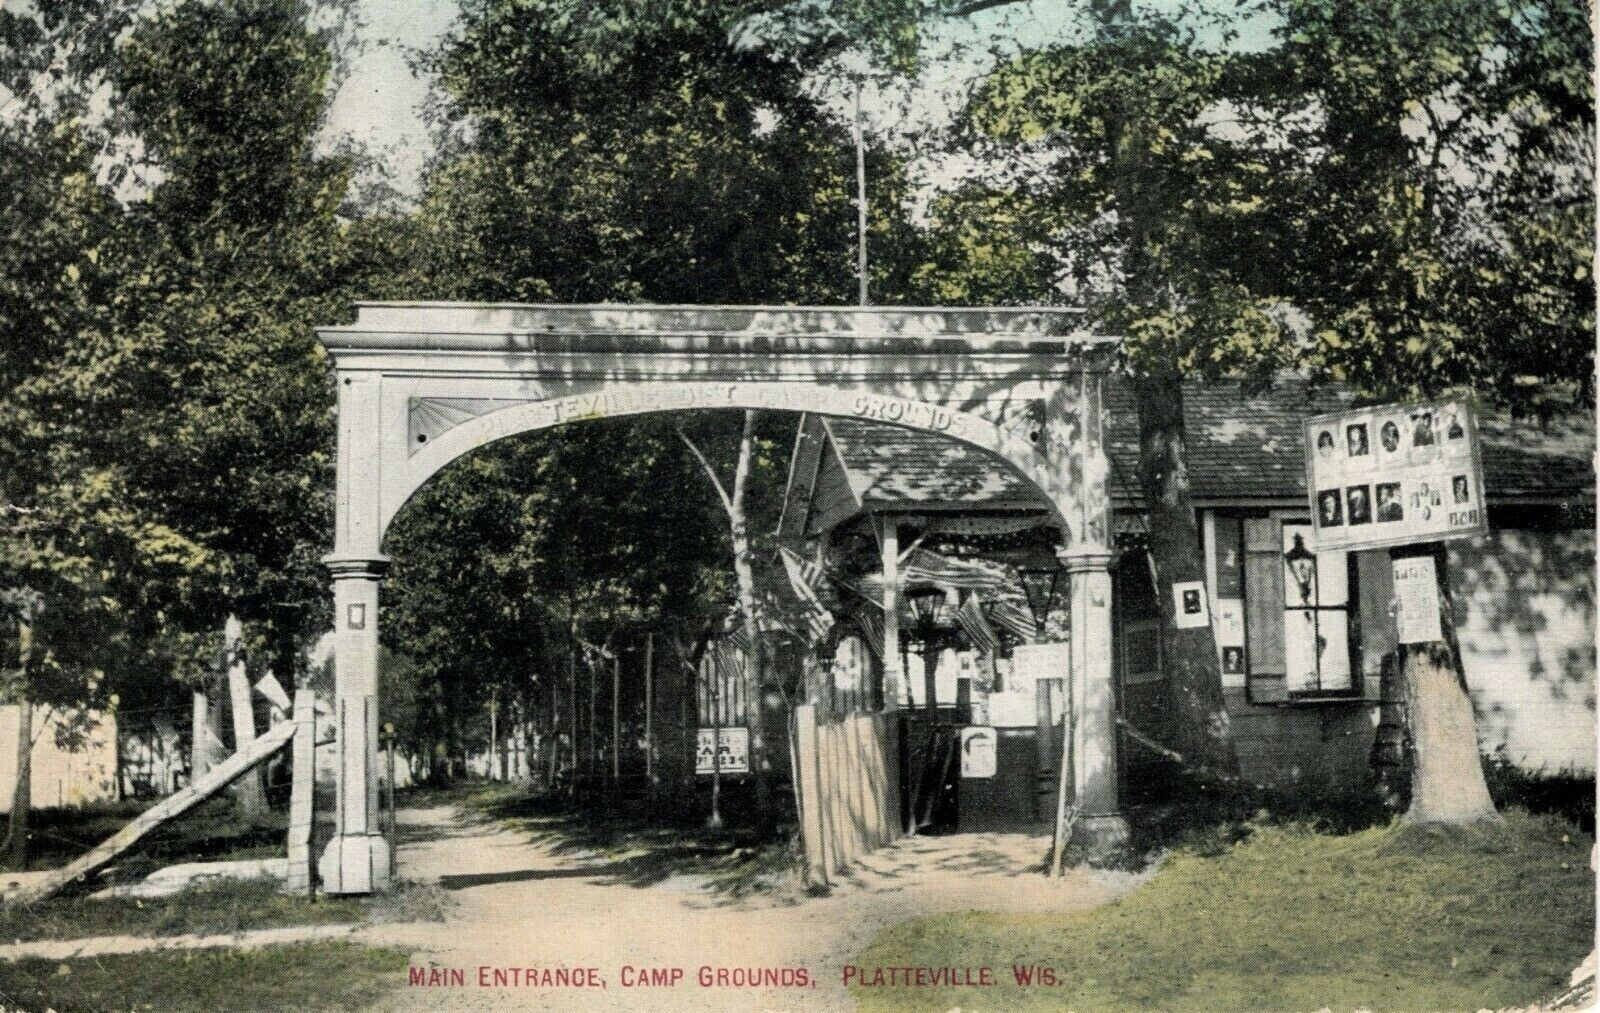 Platteville, Wisconsin - The Main Entrance to the Campgrounds - in 1909